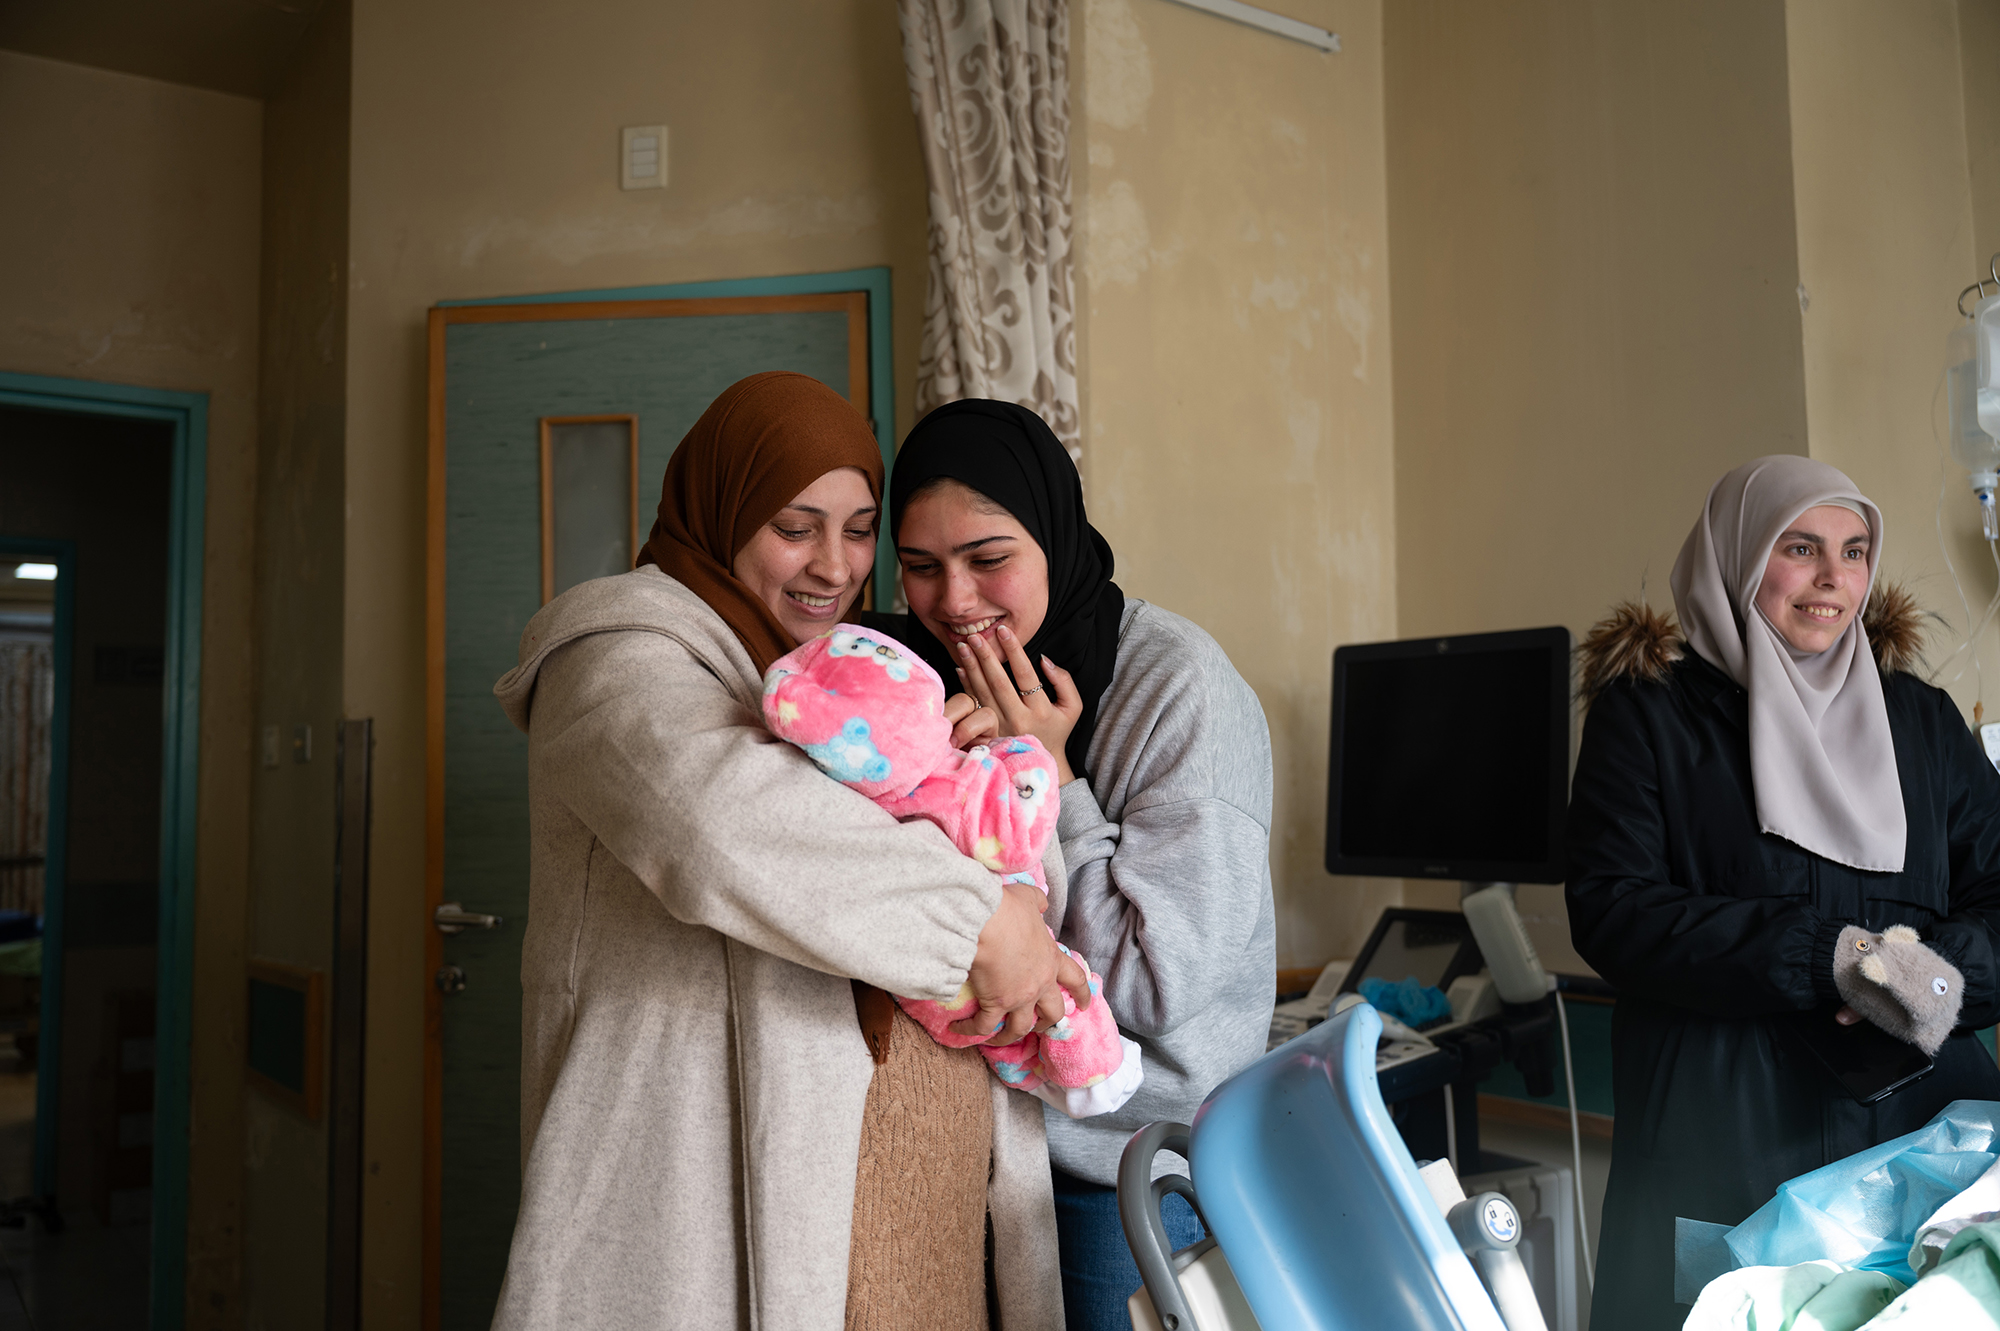 Two women look at a baby wrapped in a blanket. A third woman is smiling, looking out of the right of the frame.